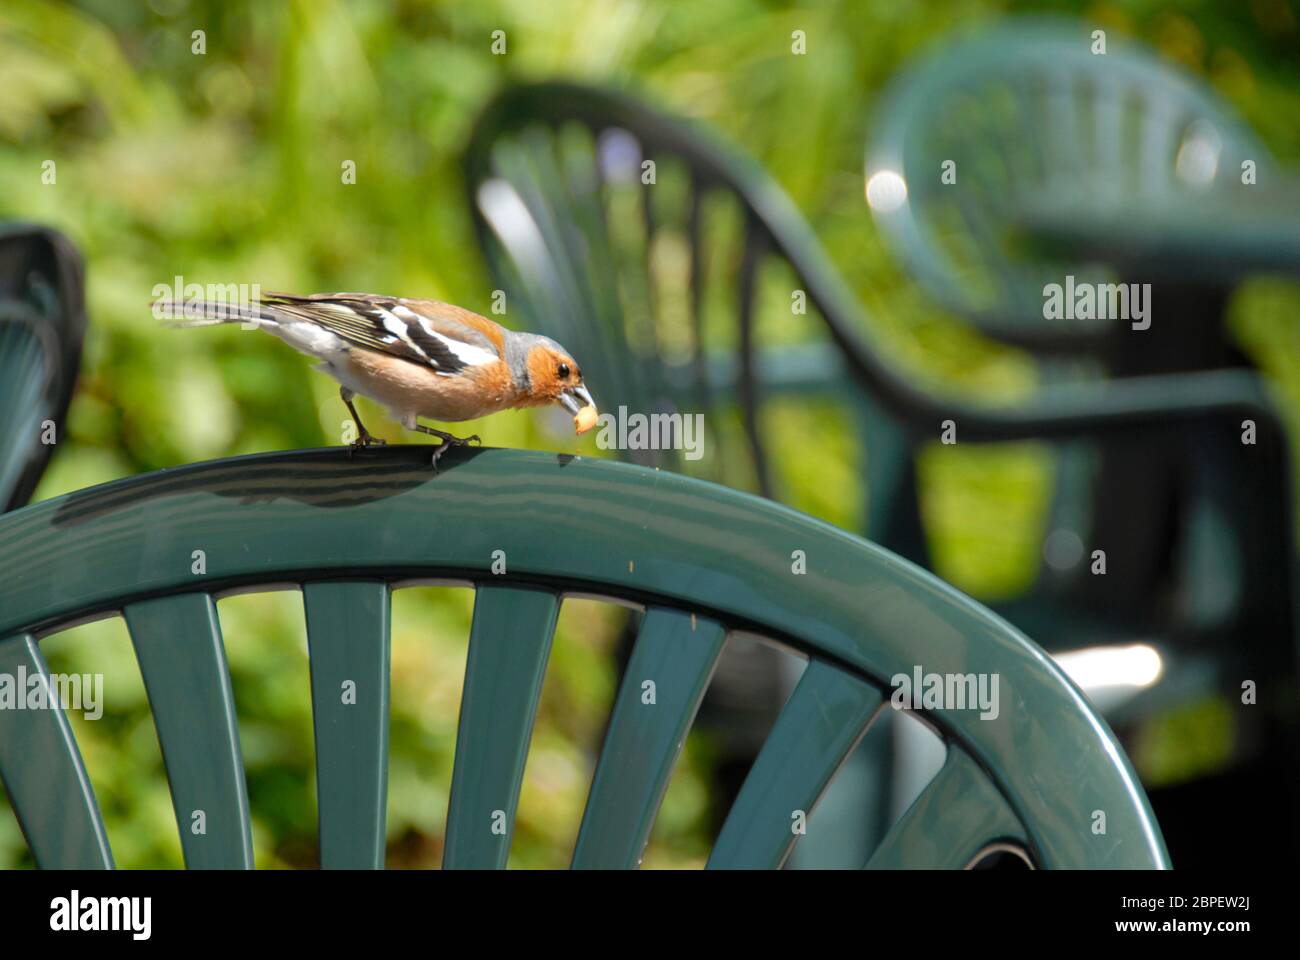 Male chaffinch finding food on the back of a plastic garden seat Stock Photo